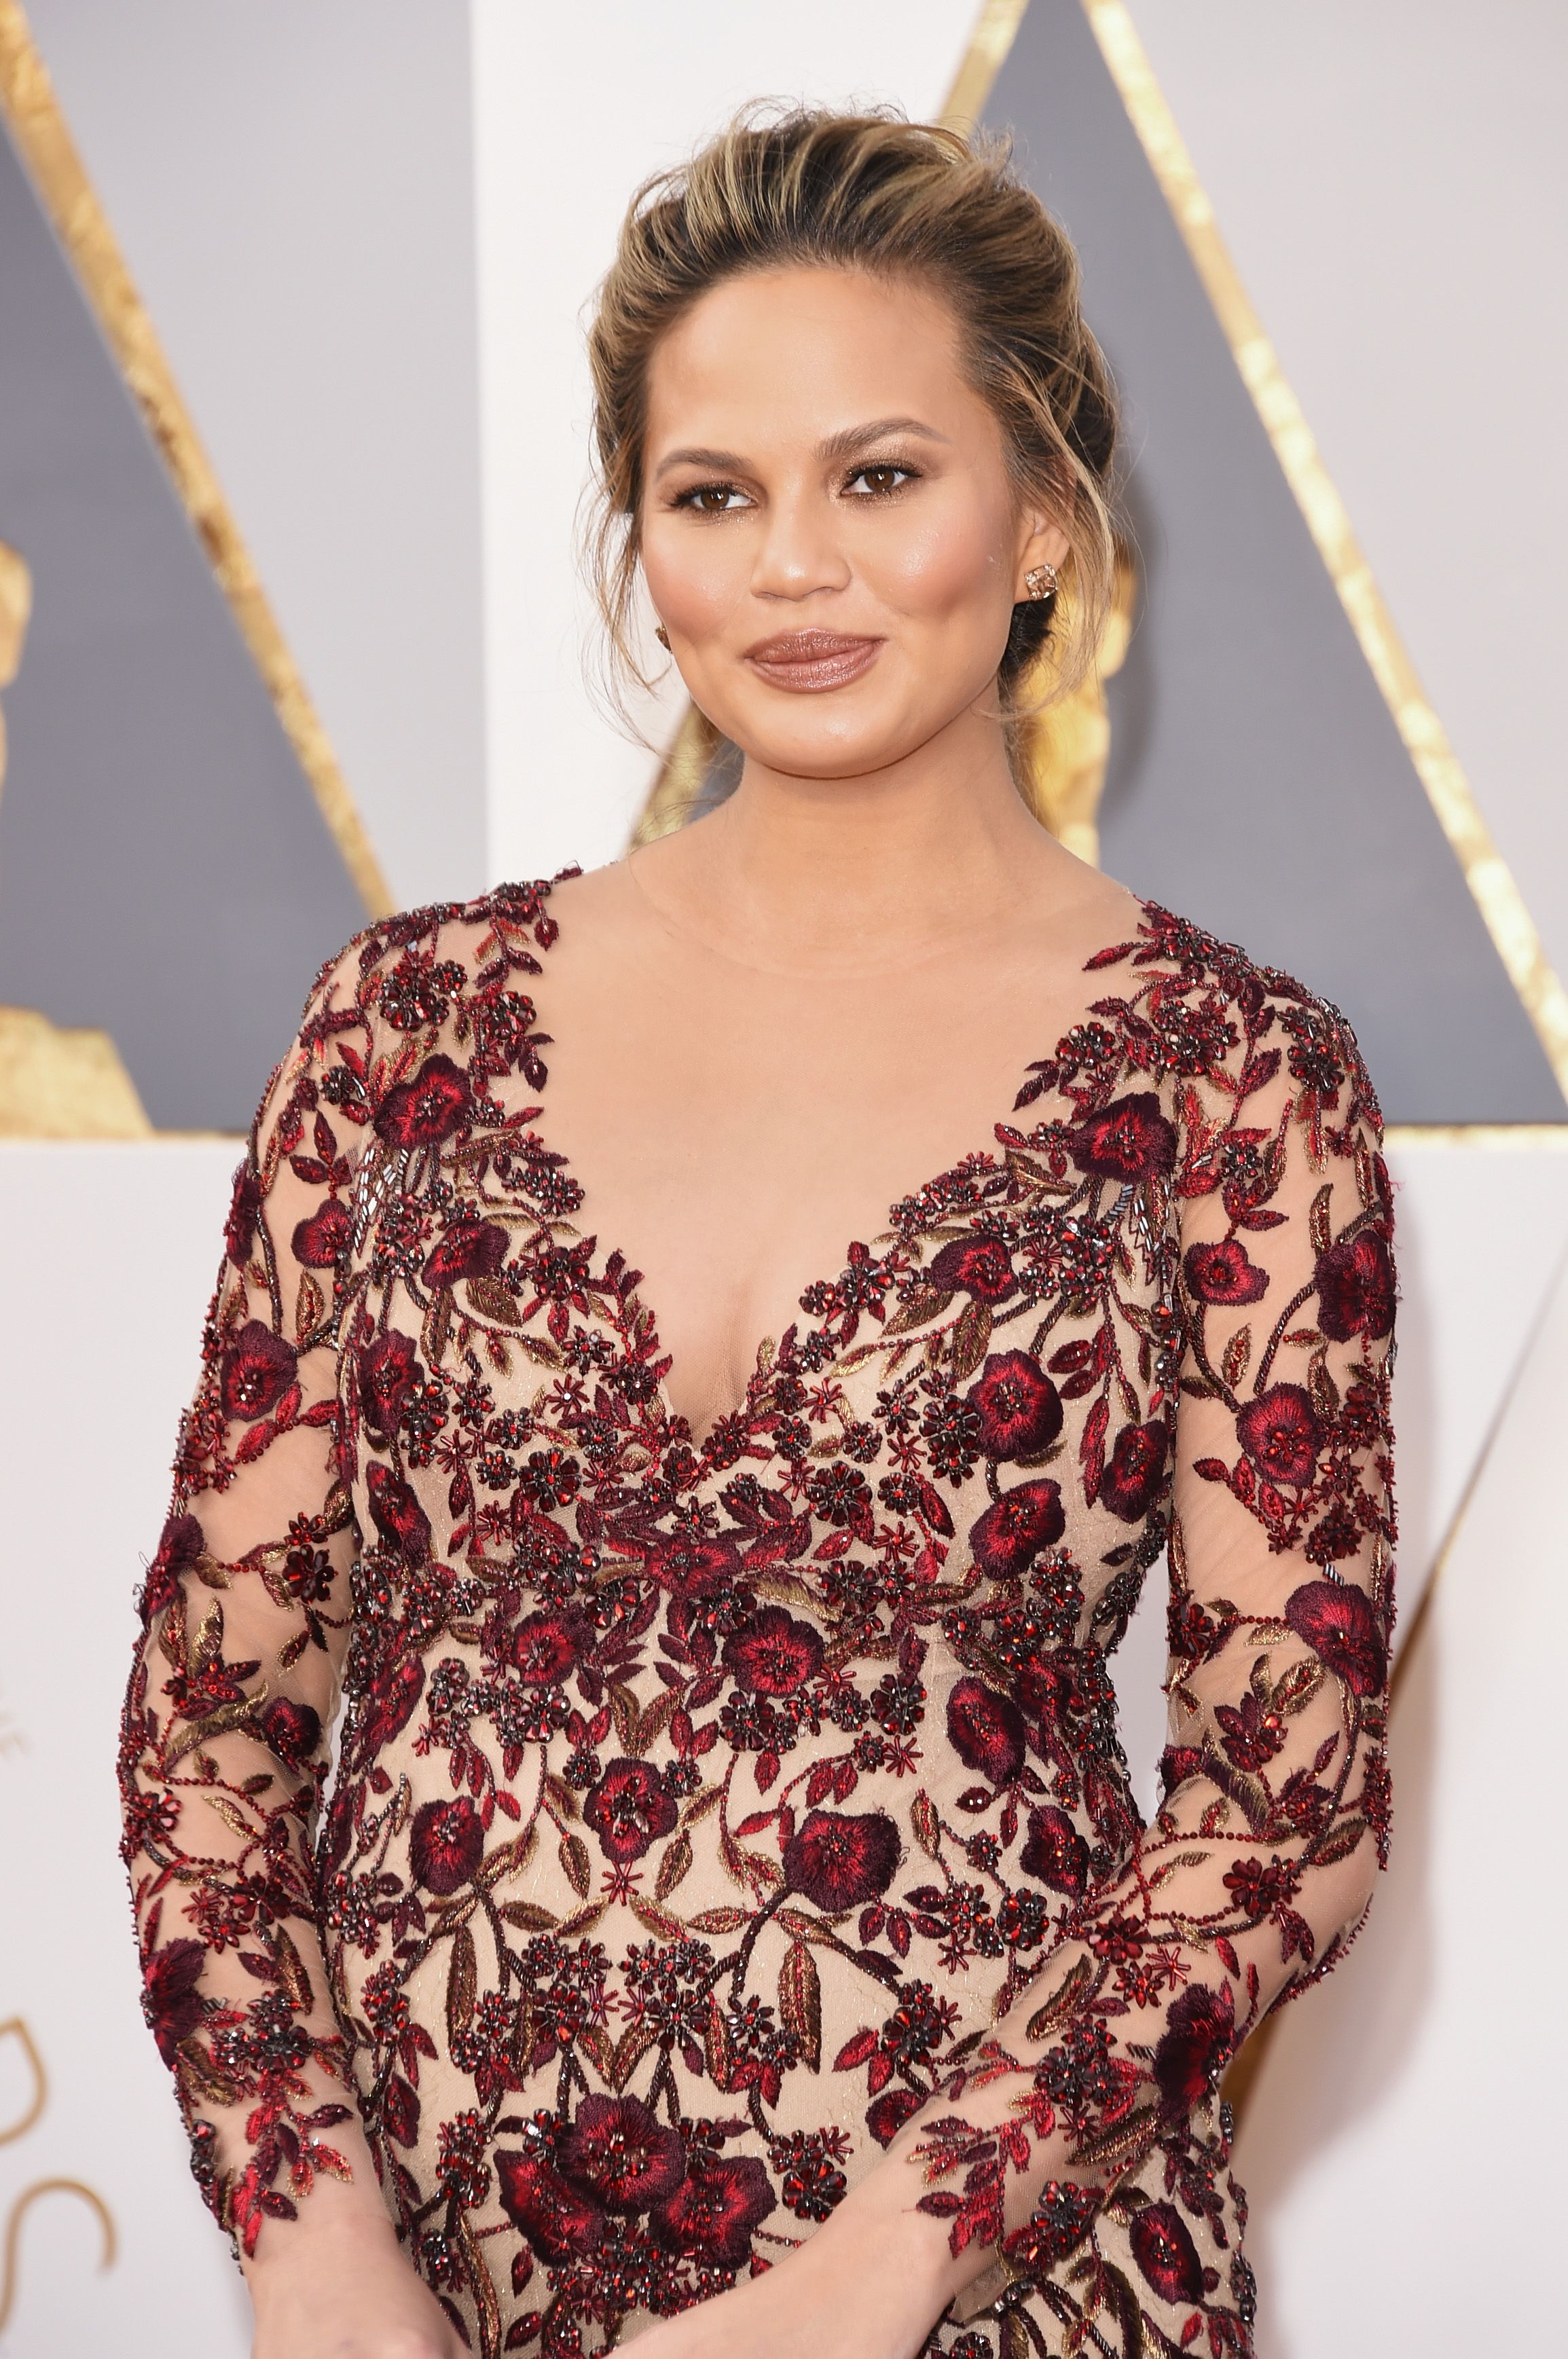 Chrissy Teigen at the Annual Academy Awards on February 28, 2016 in Hollywood. | Photo: Getty Images